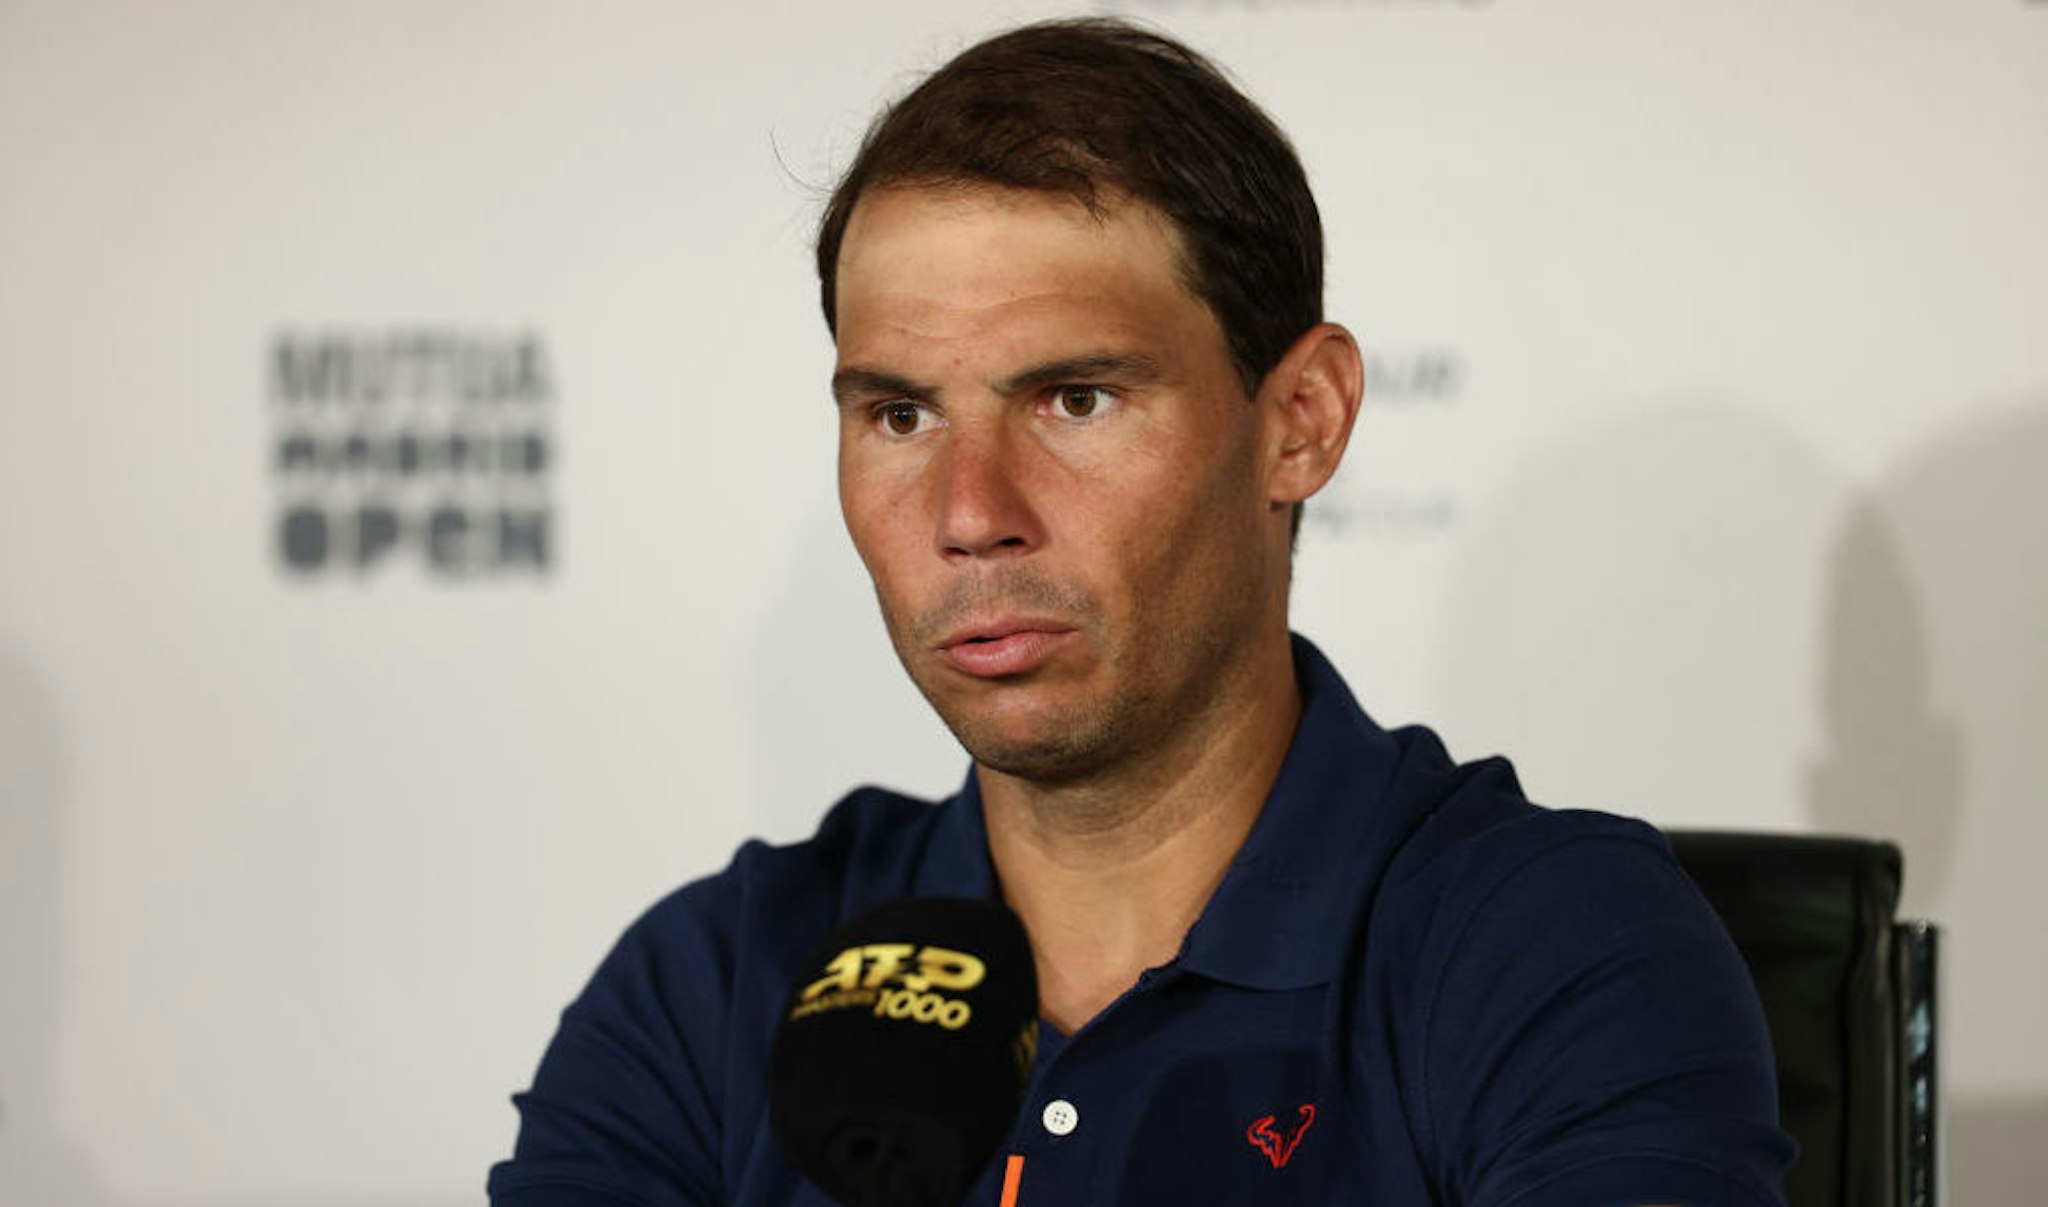 MADRID, SPAIN - MAY 01: Rafael Nadal of Spain attends his press conference during the Mutua Madrid Open 2022 at La Caja Magica on May 01, 2022, in Madrid, Spain. (Photo By Oscar J. Barroso/Europa Press via Getty Images)